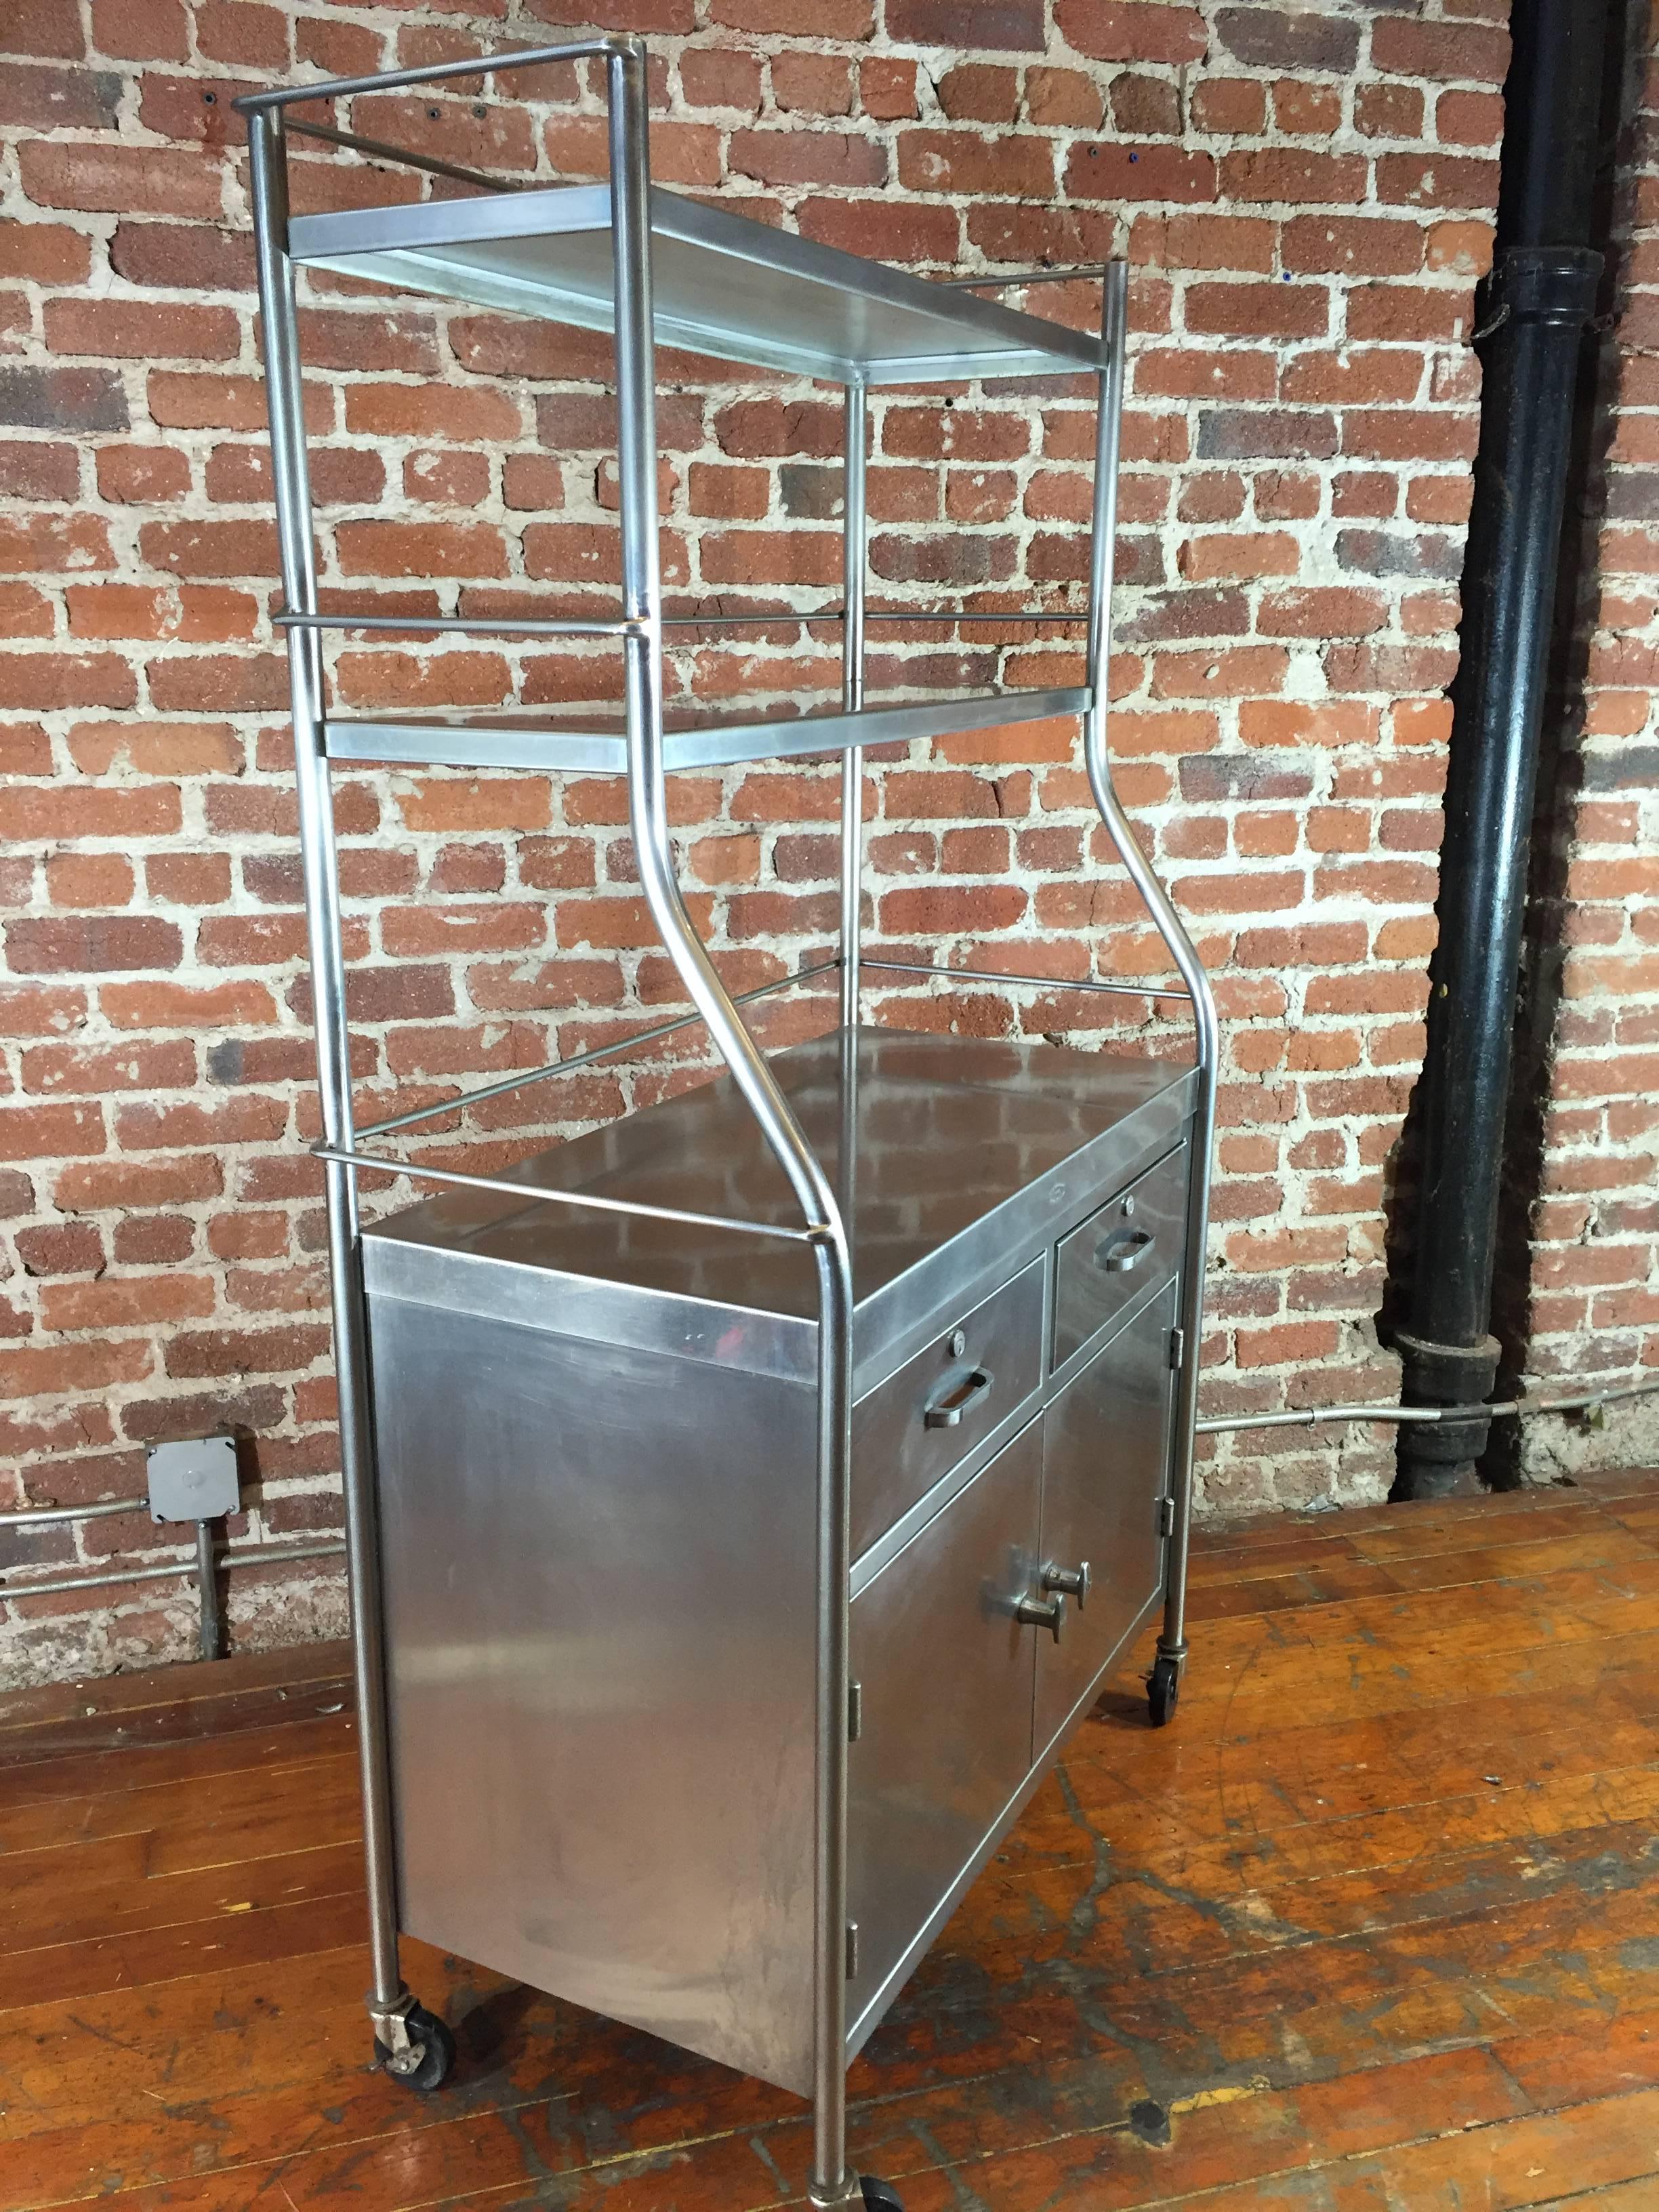 Excellent quality stainless steel utility cabinet. This piece features 2 drawers, lower cabinet storage, and open upper shelves. Surface height is 32